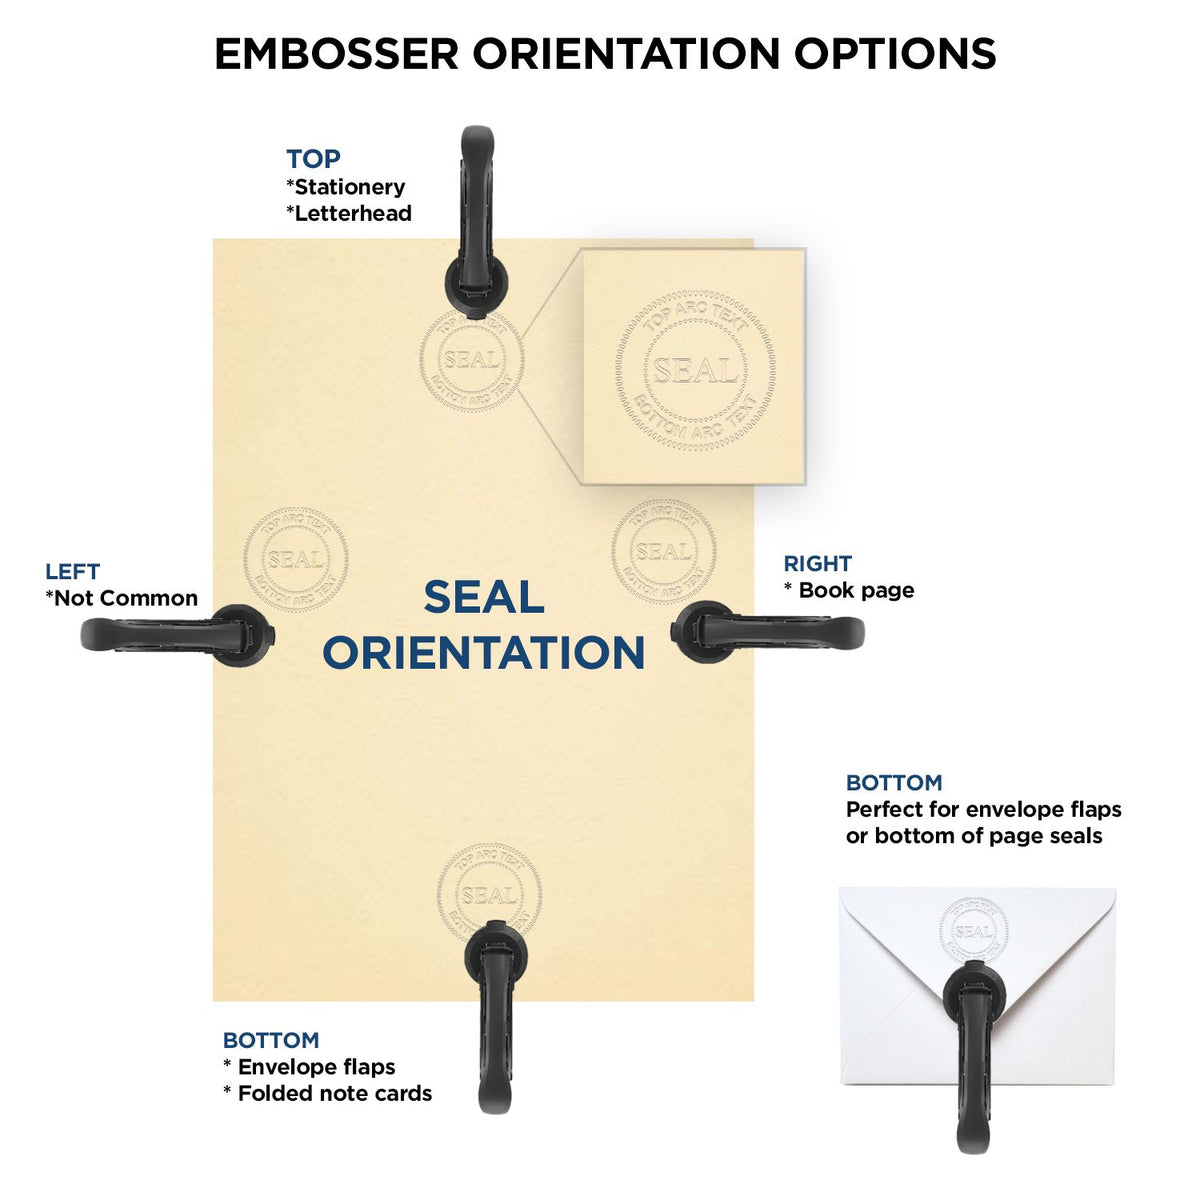 An infographic for the Handheld Missouri Architect Seal Embosser showing embosser orientation, this is showing examples of a top, bottom, right and left insert.